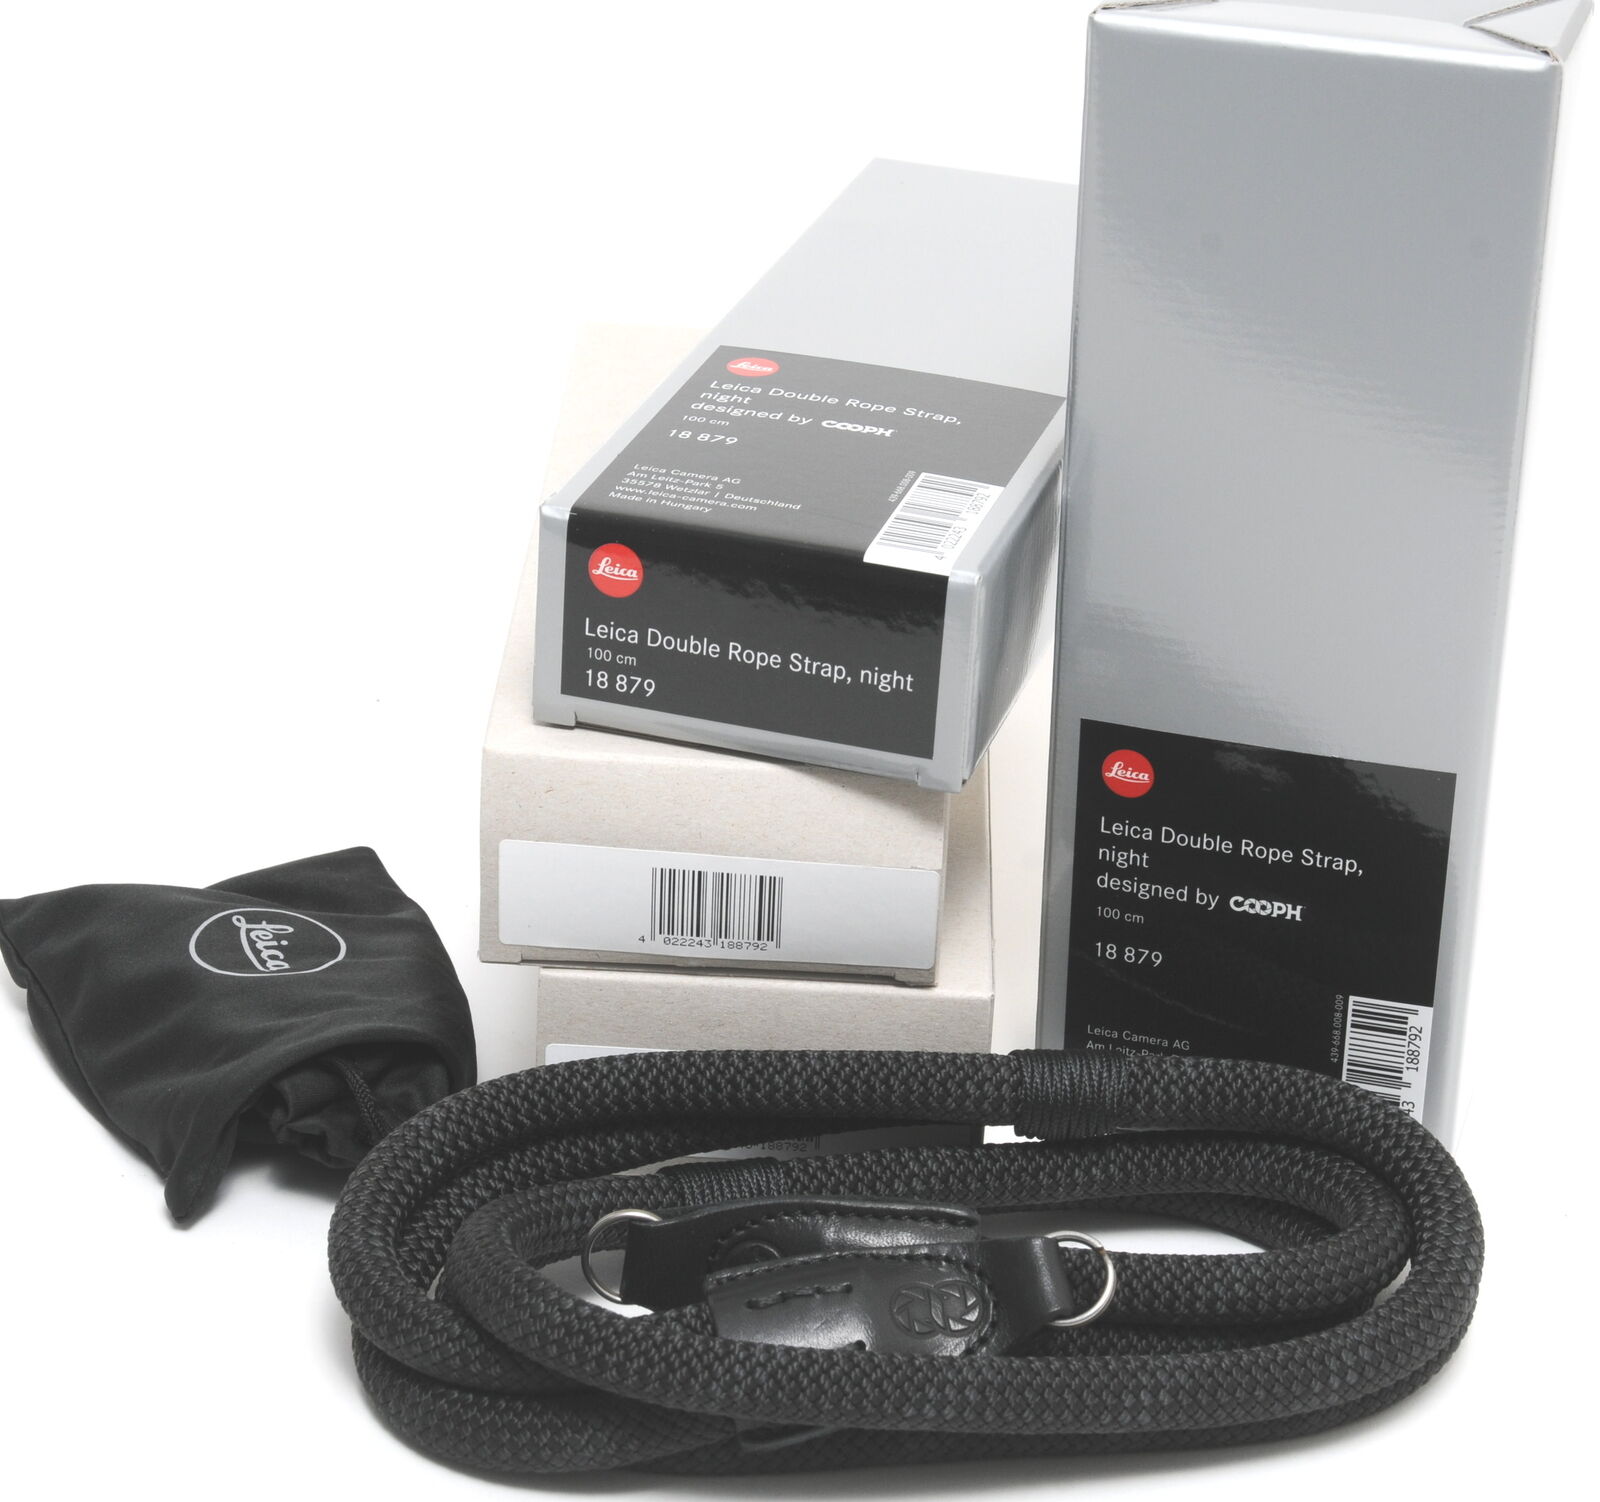 Leica Double Rope Strap created by COOPH, night, 100 cm, Ring SALE 18879